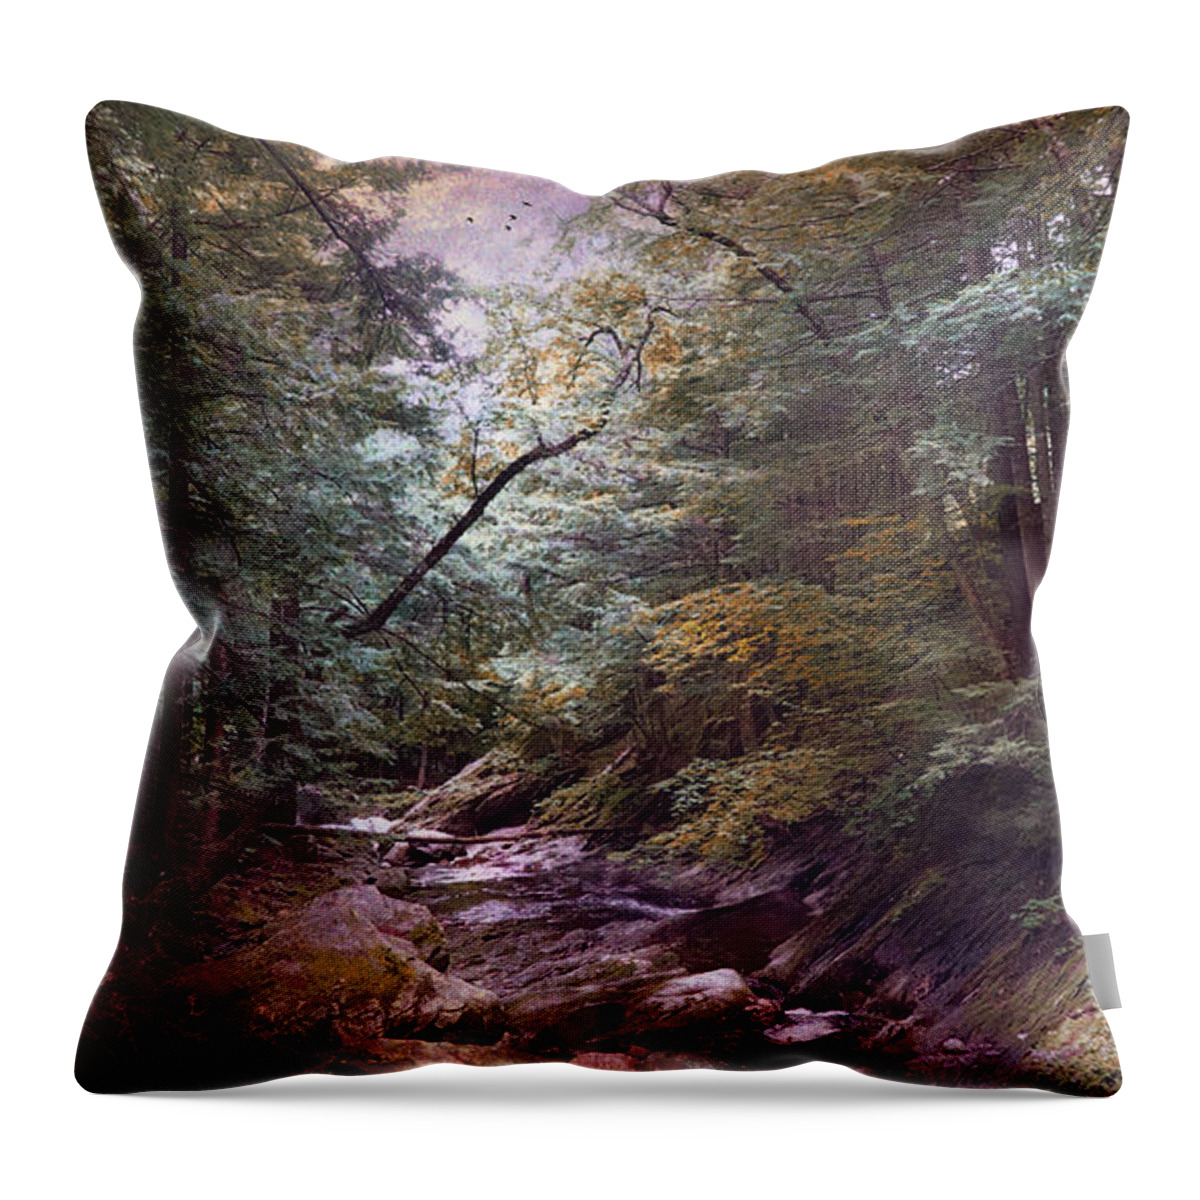 Water Throw Pillow featuring the photograph Running Waters by John Rivera